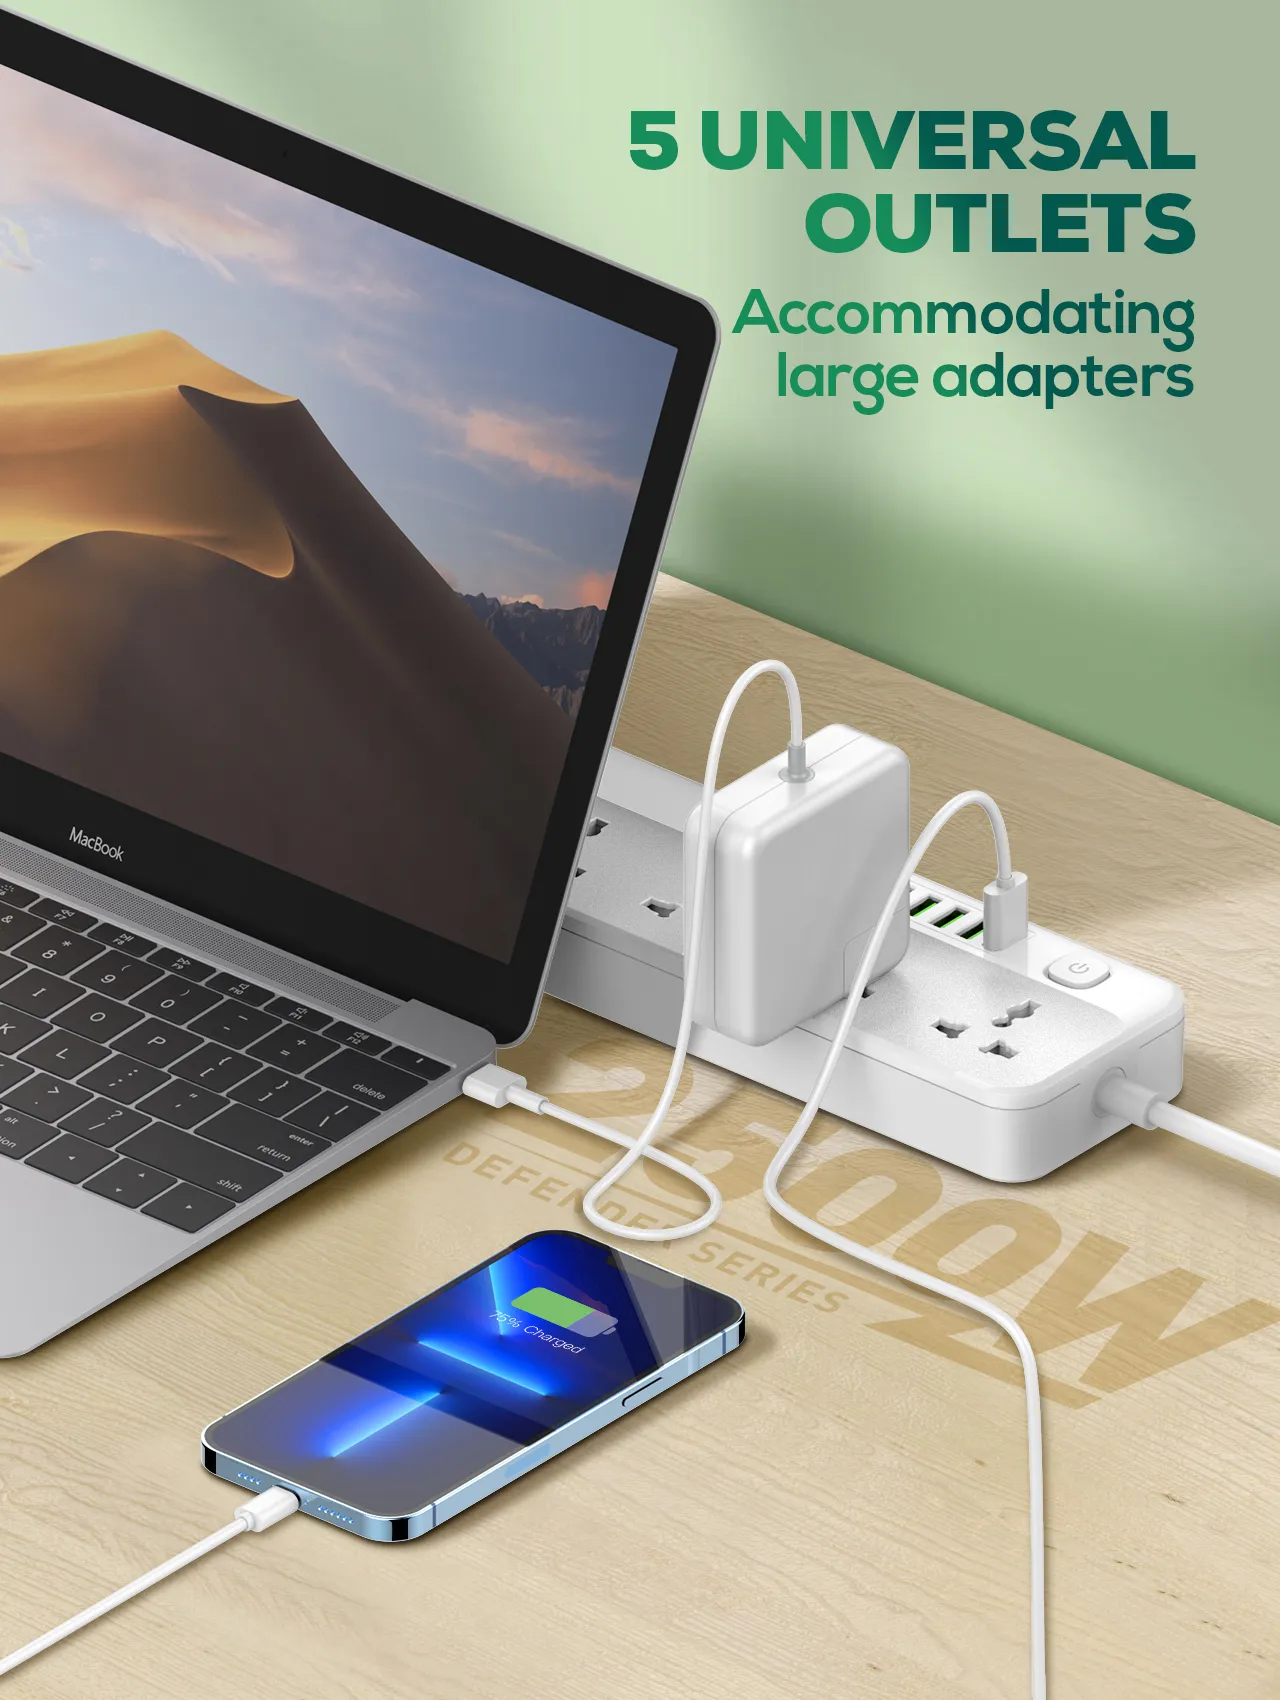 Buy LDNIO SC5614 2500W Universal Outlets 6-USB Ports Power Extension Price In Pakistan available on techmac.pk we offer fast home delivery all over nationwide.